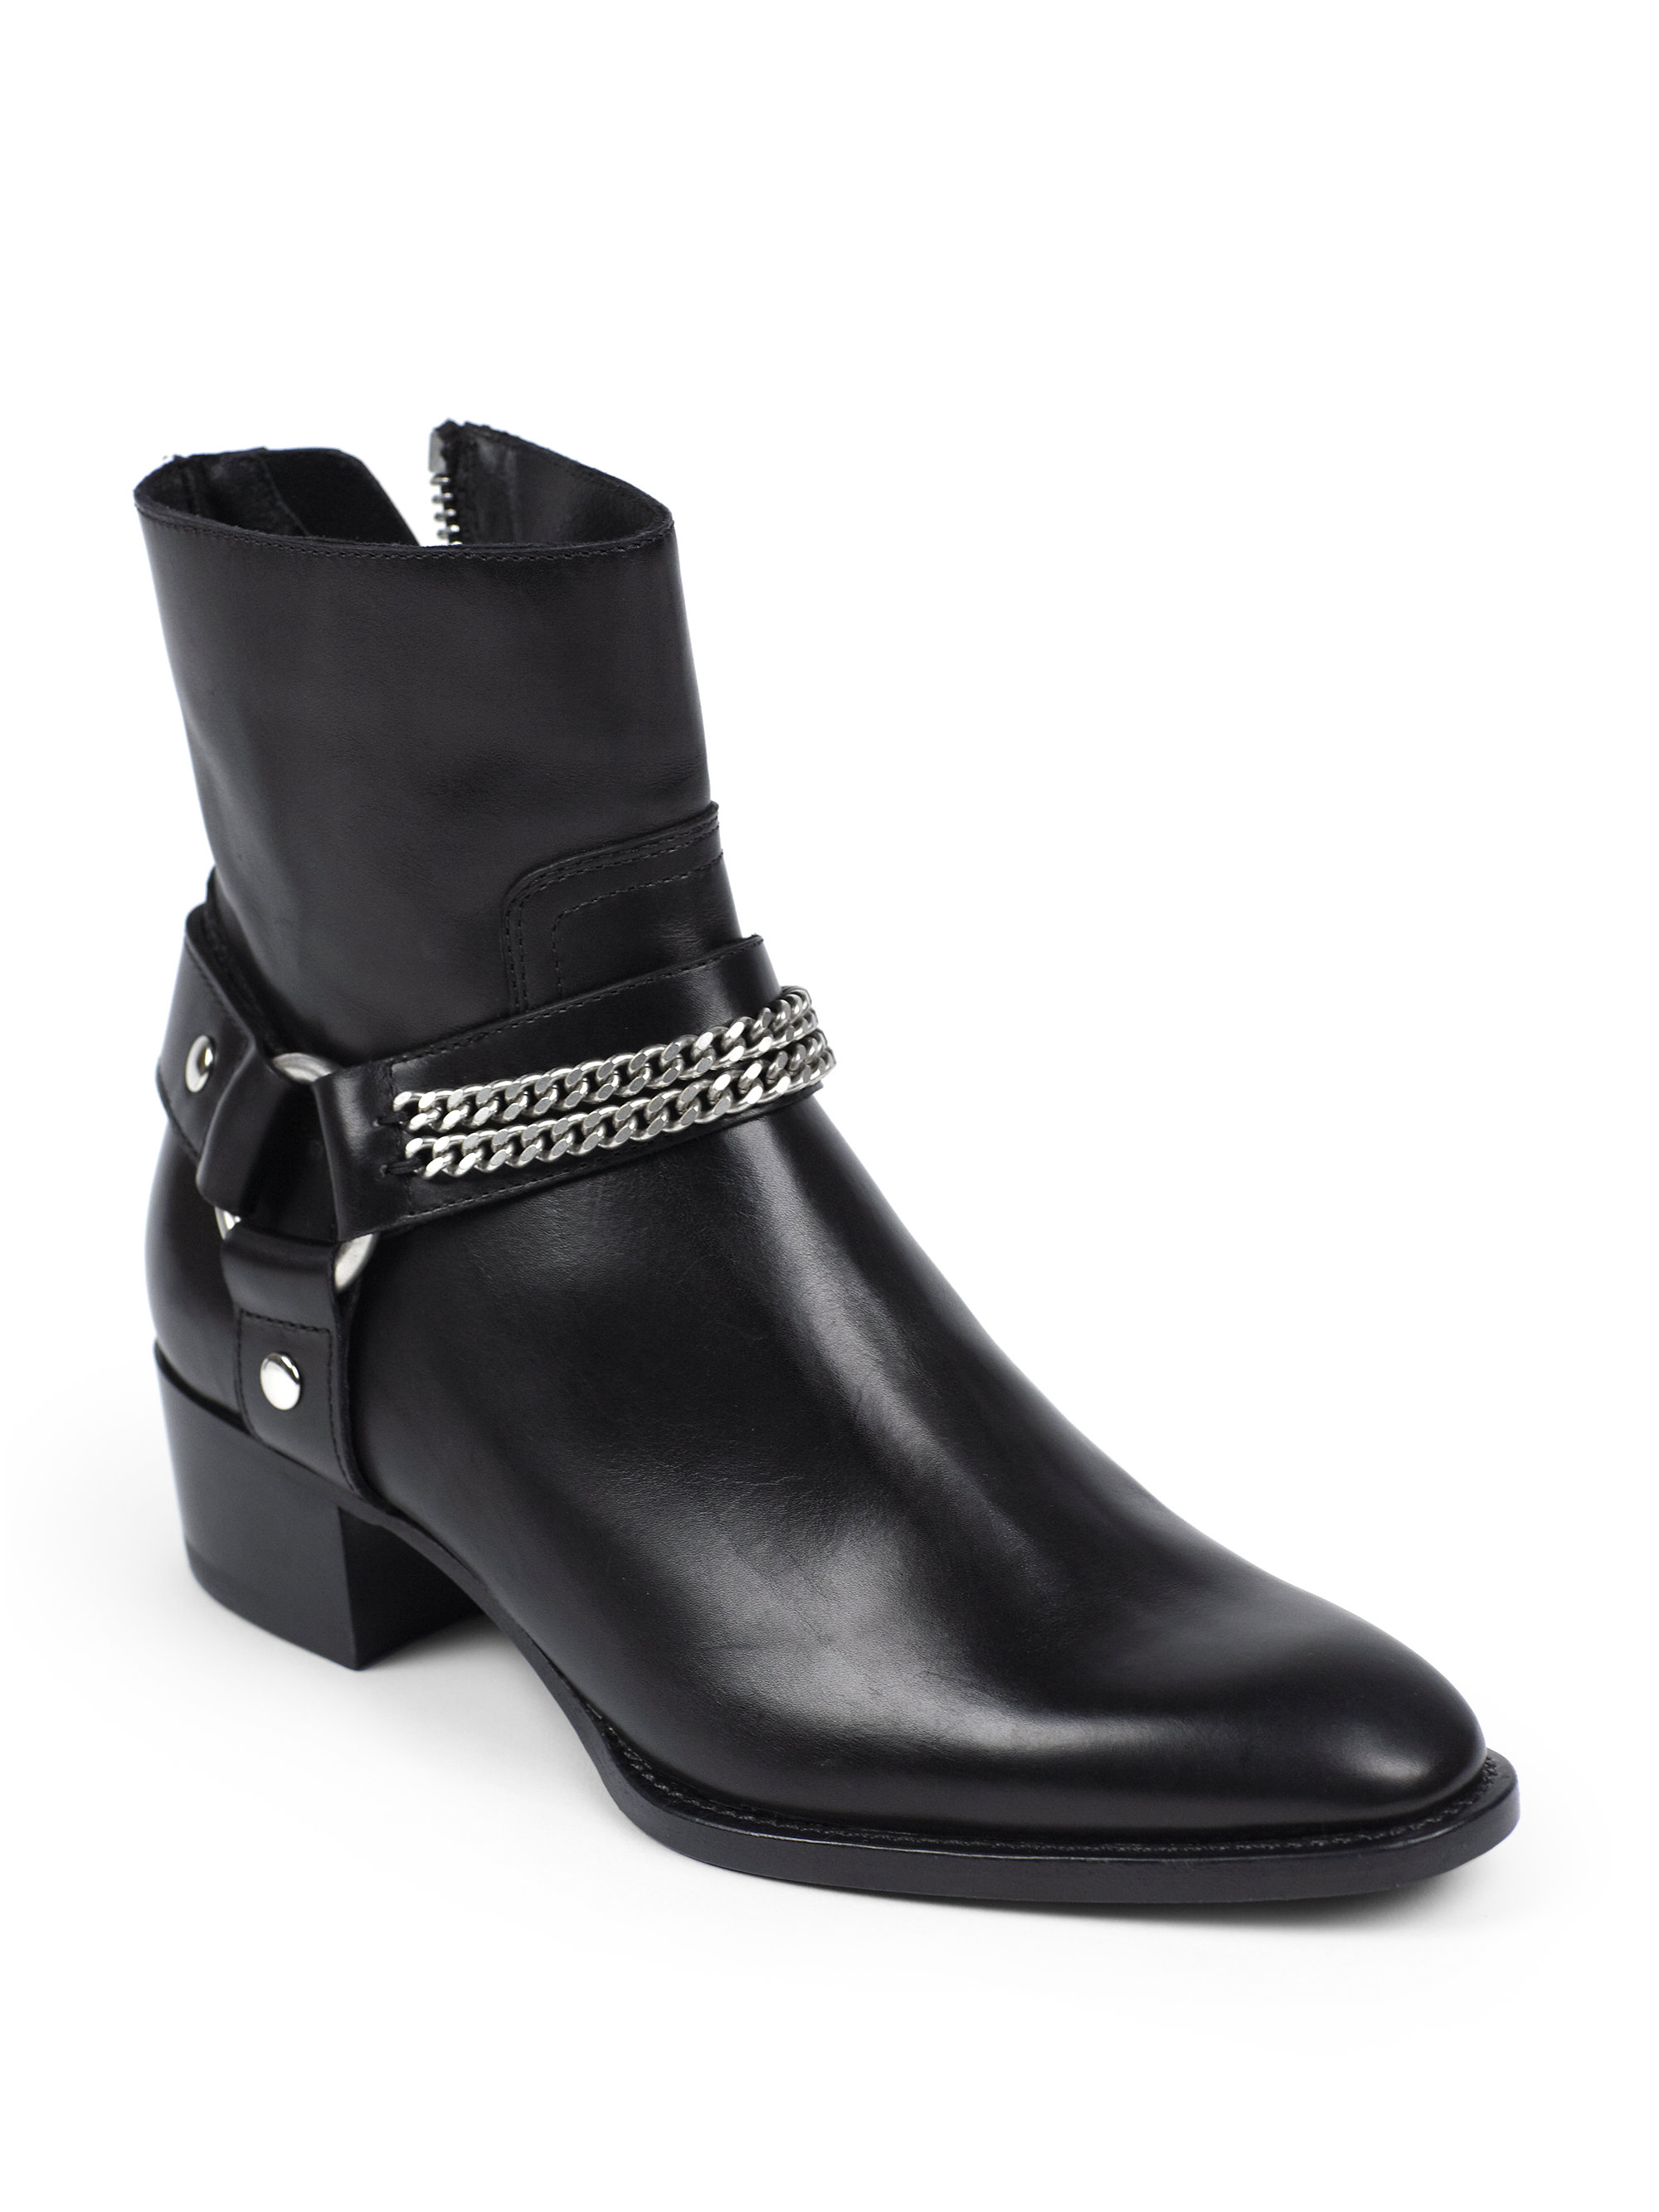 Saint Laurent Rock Chelsea Leather Chain Harness Ankle Boots in Black | Lyst